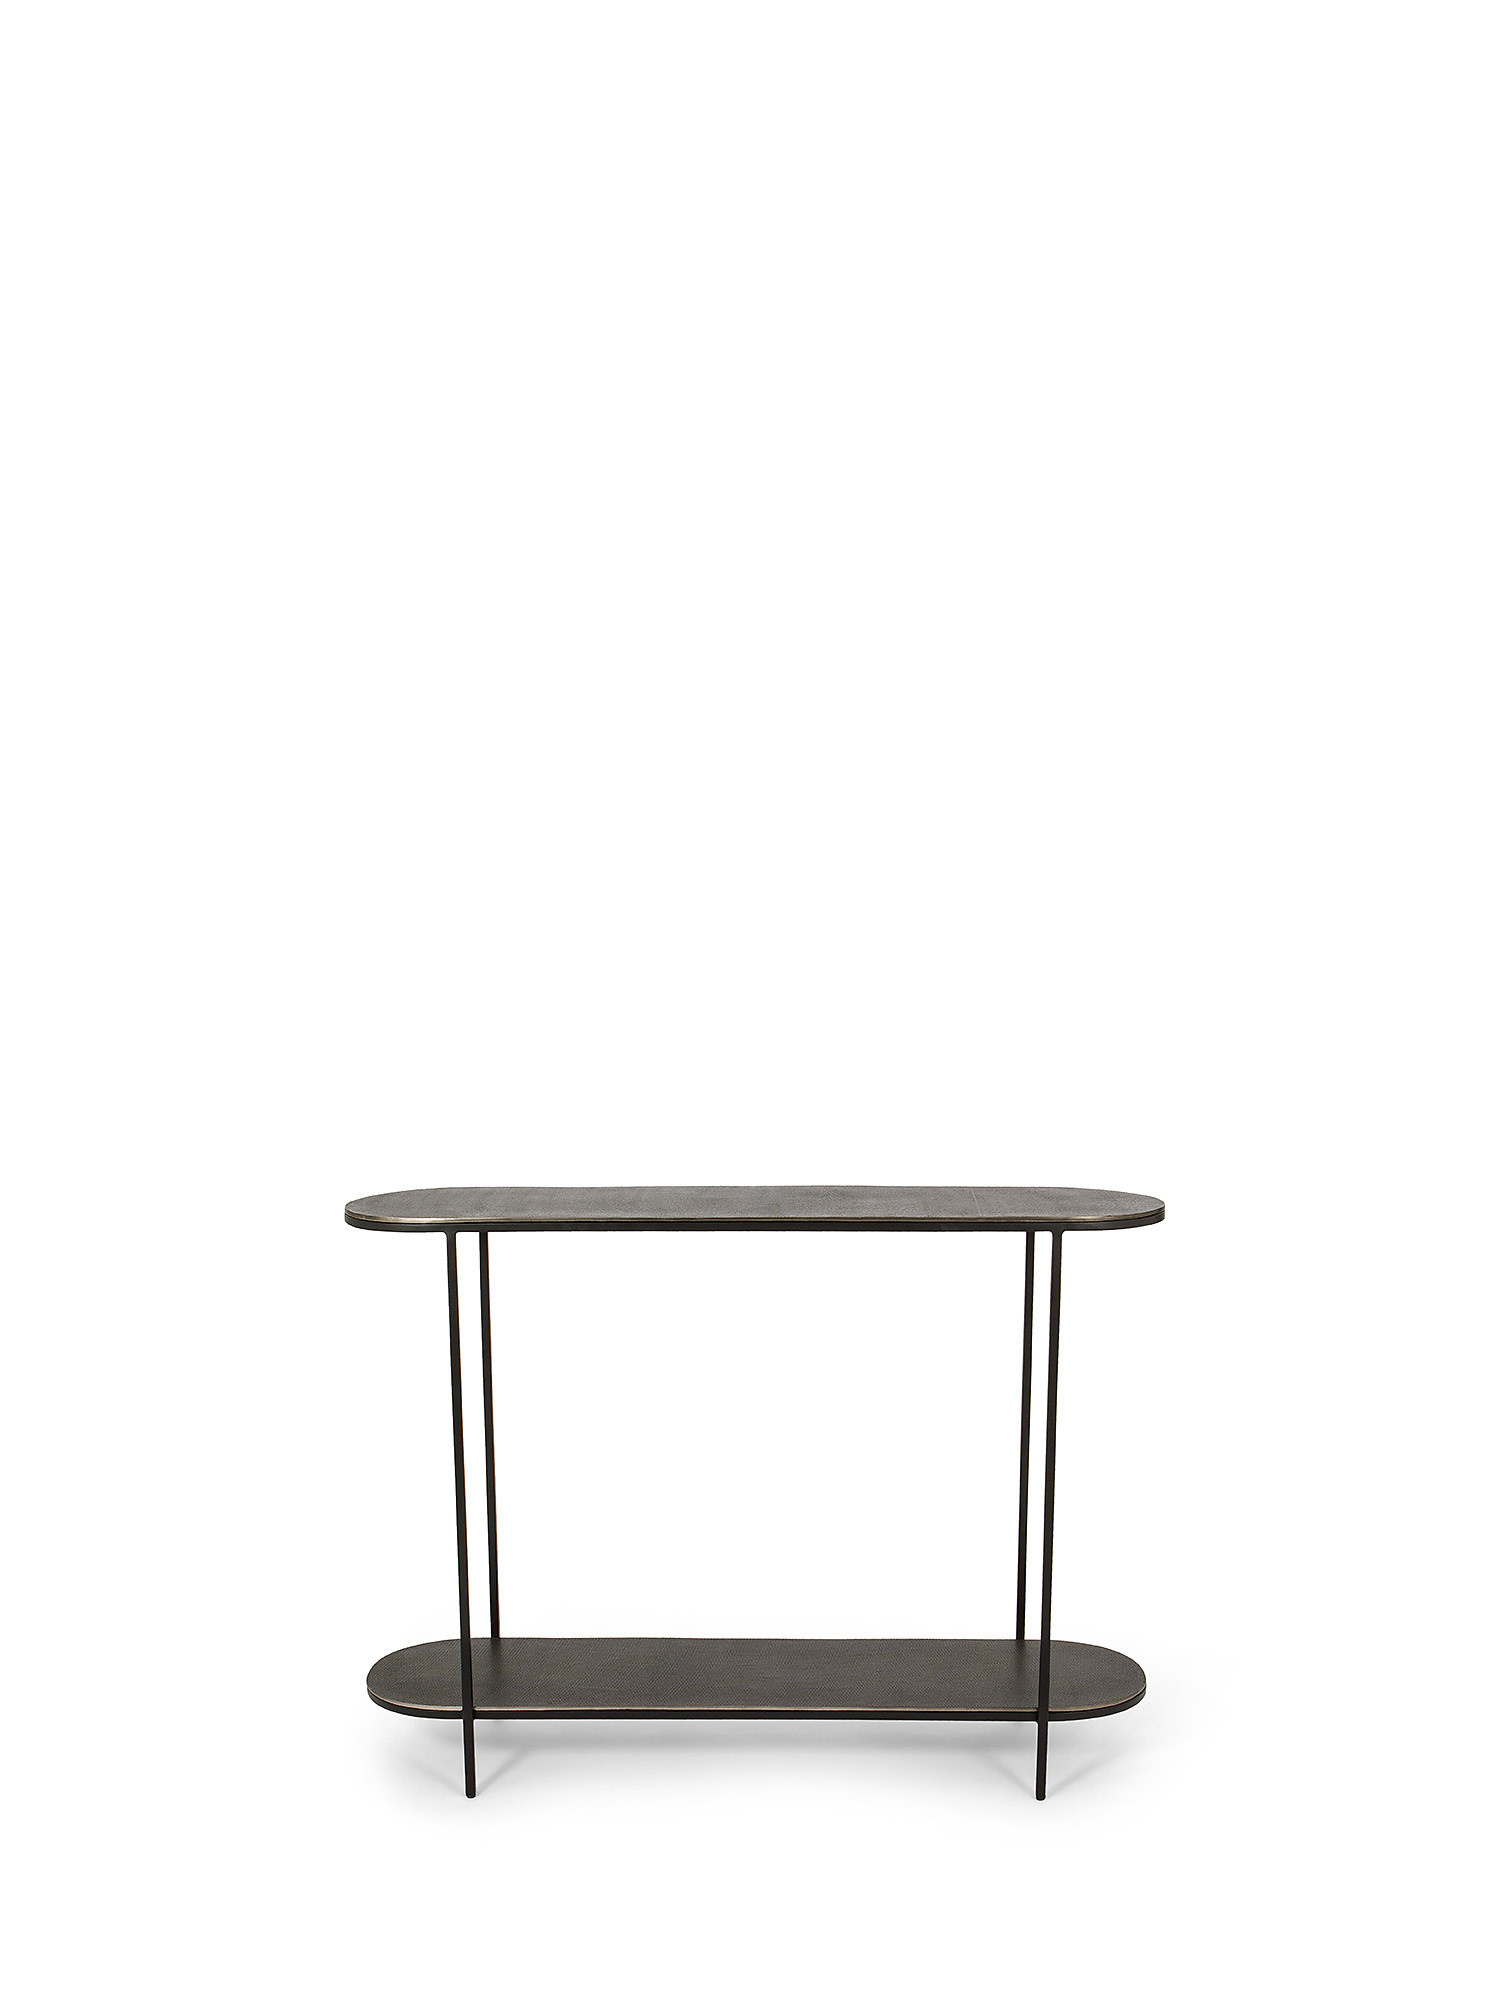 Graphite graphite effect console, Grey, large image number 0